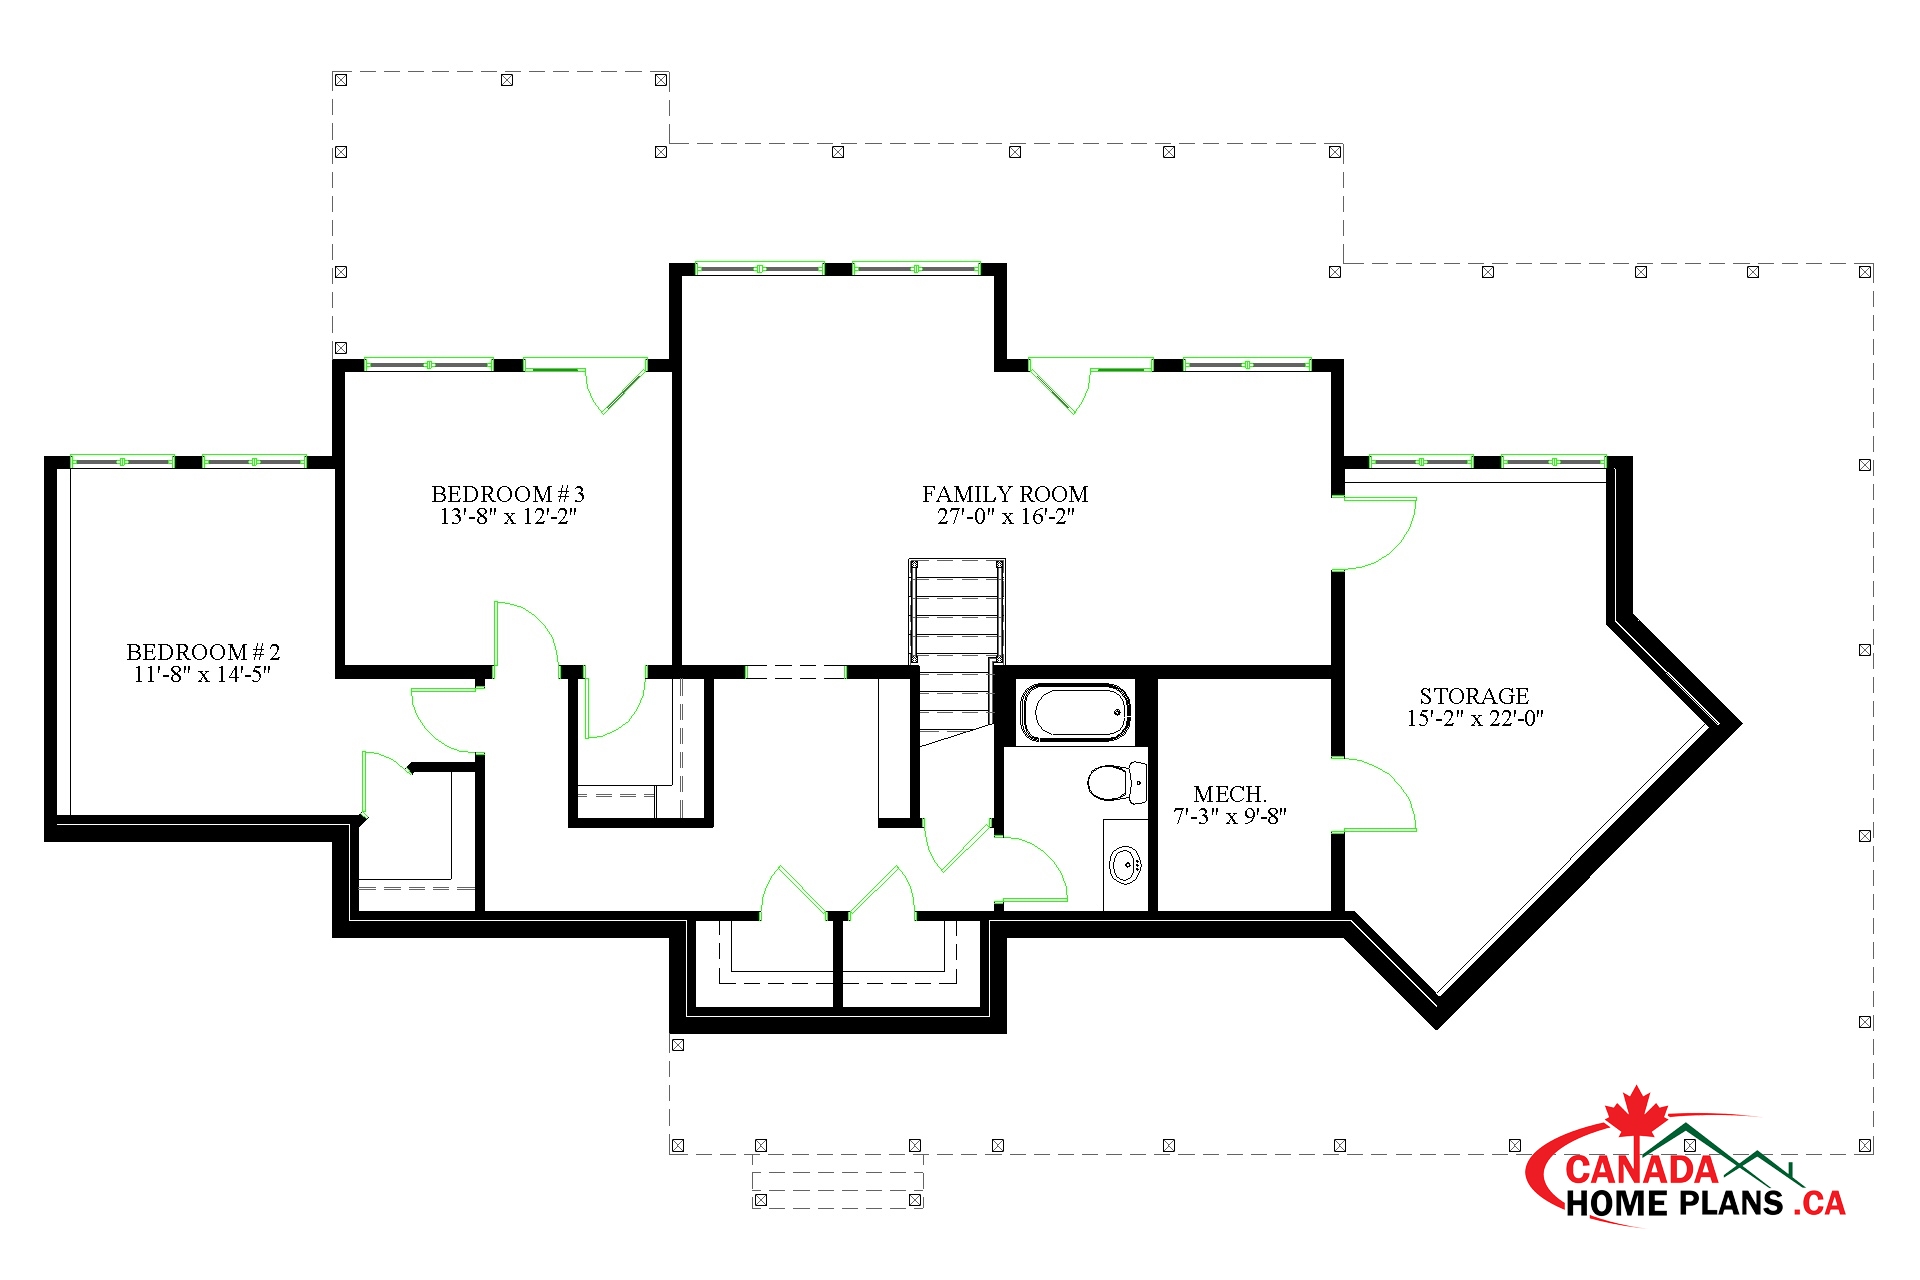 Montgomery Canada Home Plans